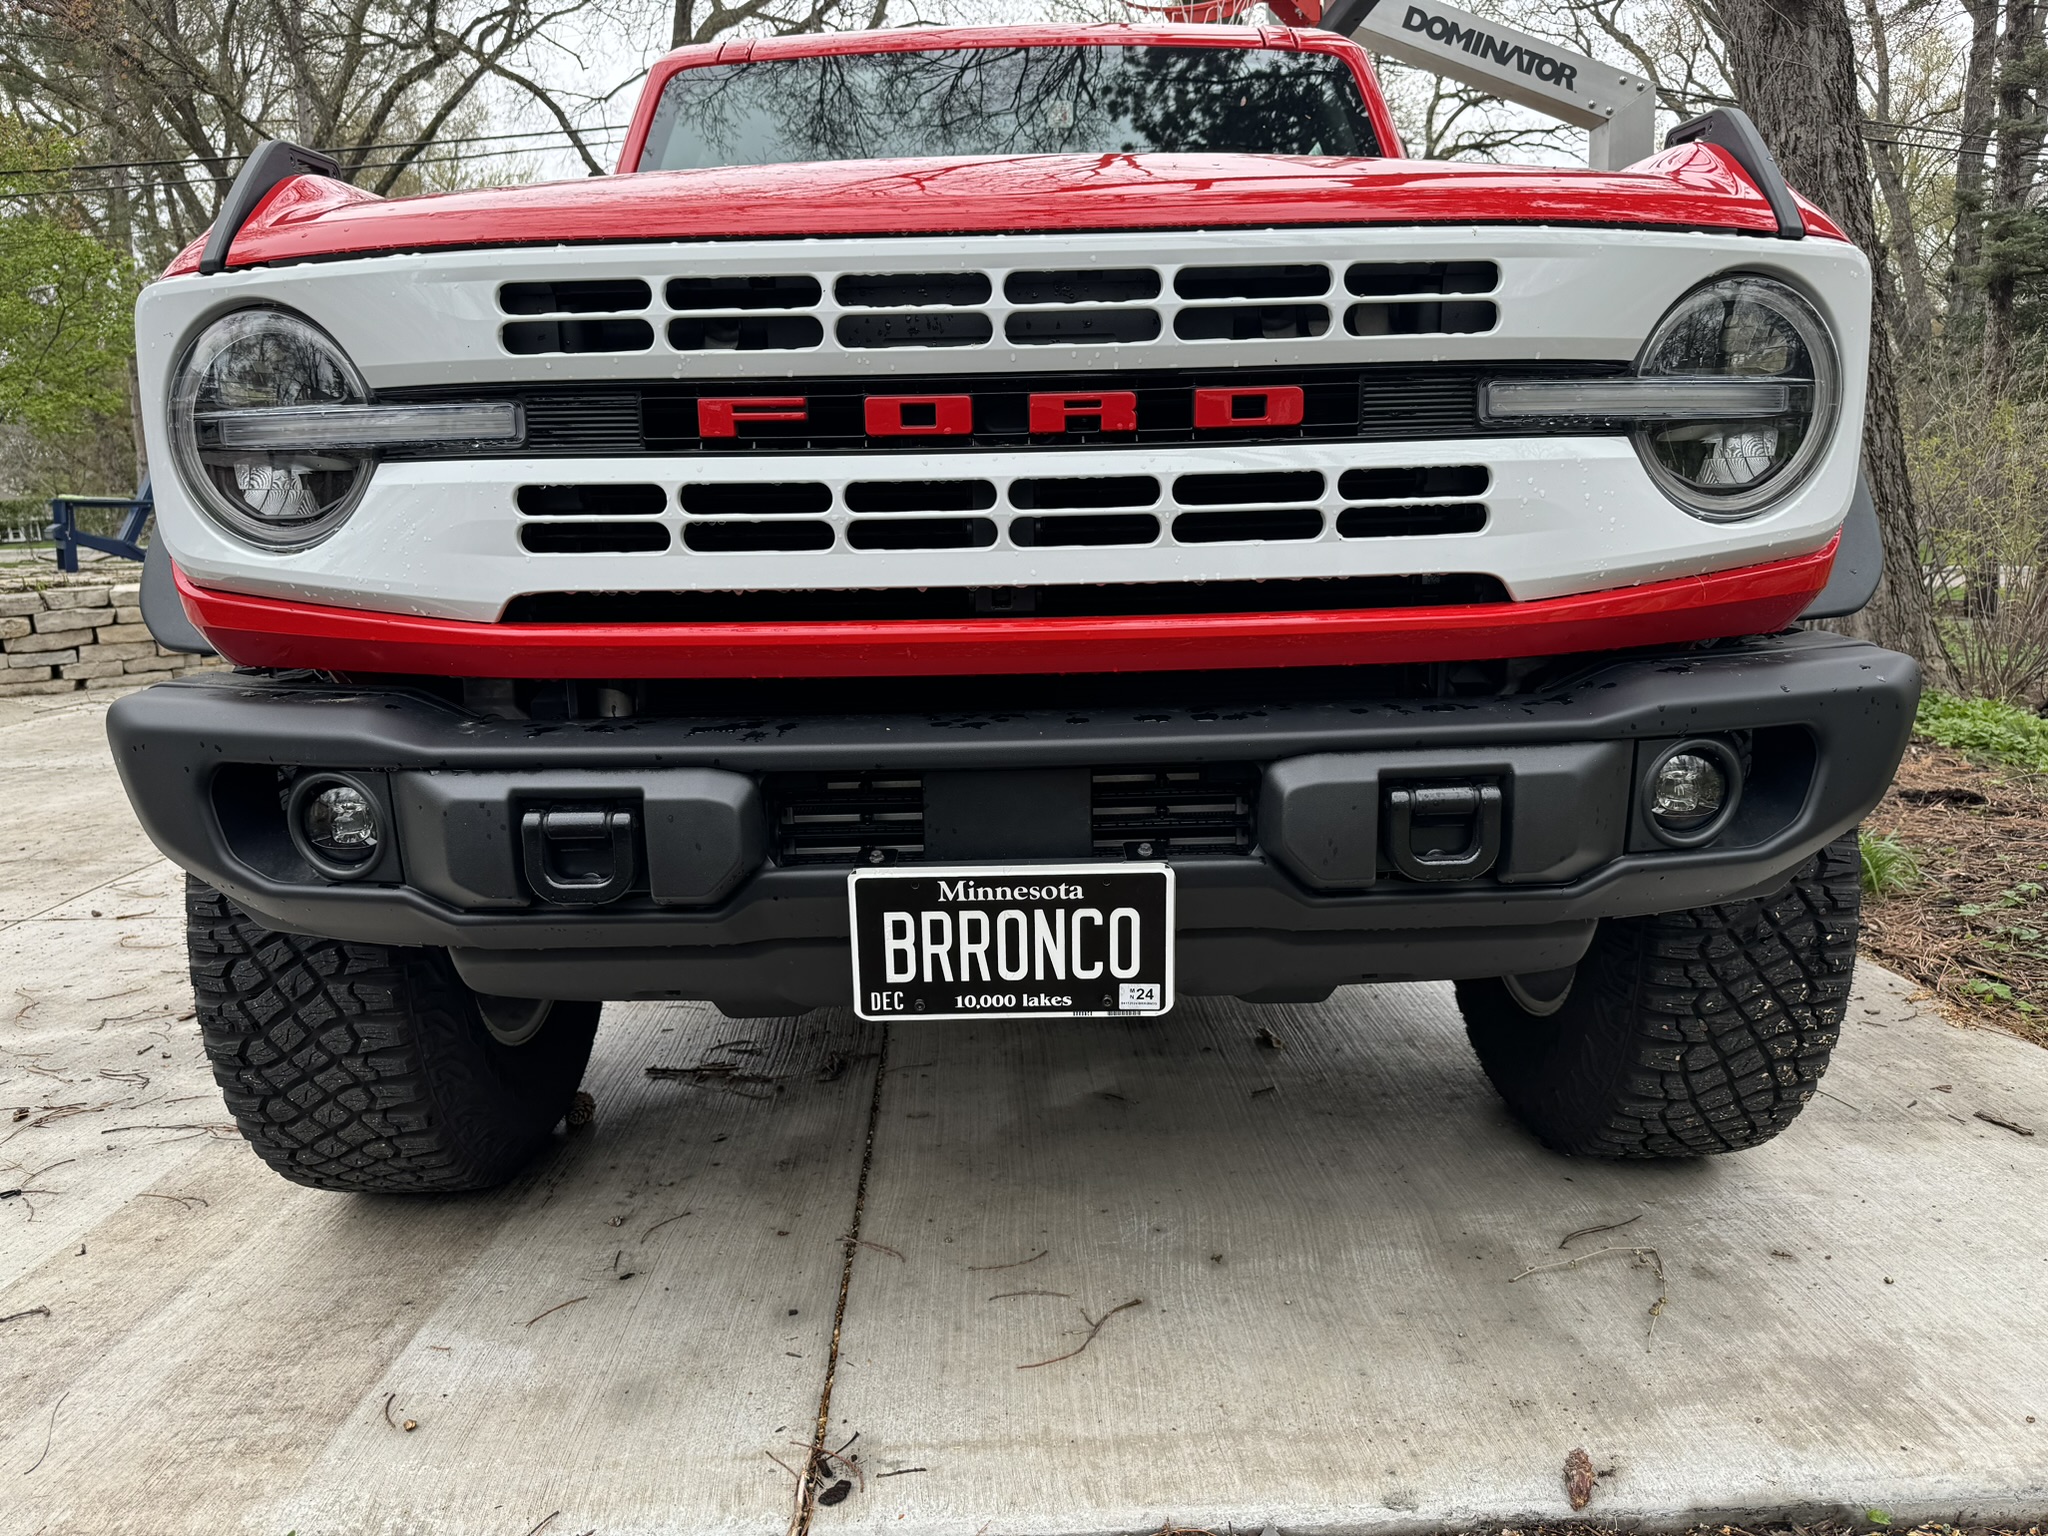 Ford Bronco PRICE DROP - Finally a Front License Plate bracket solution - order yours today 1714247781154-t5